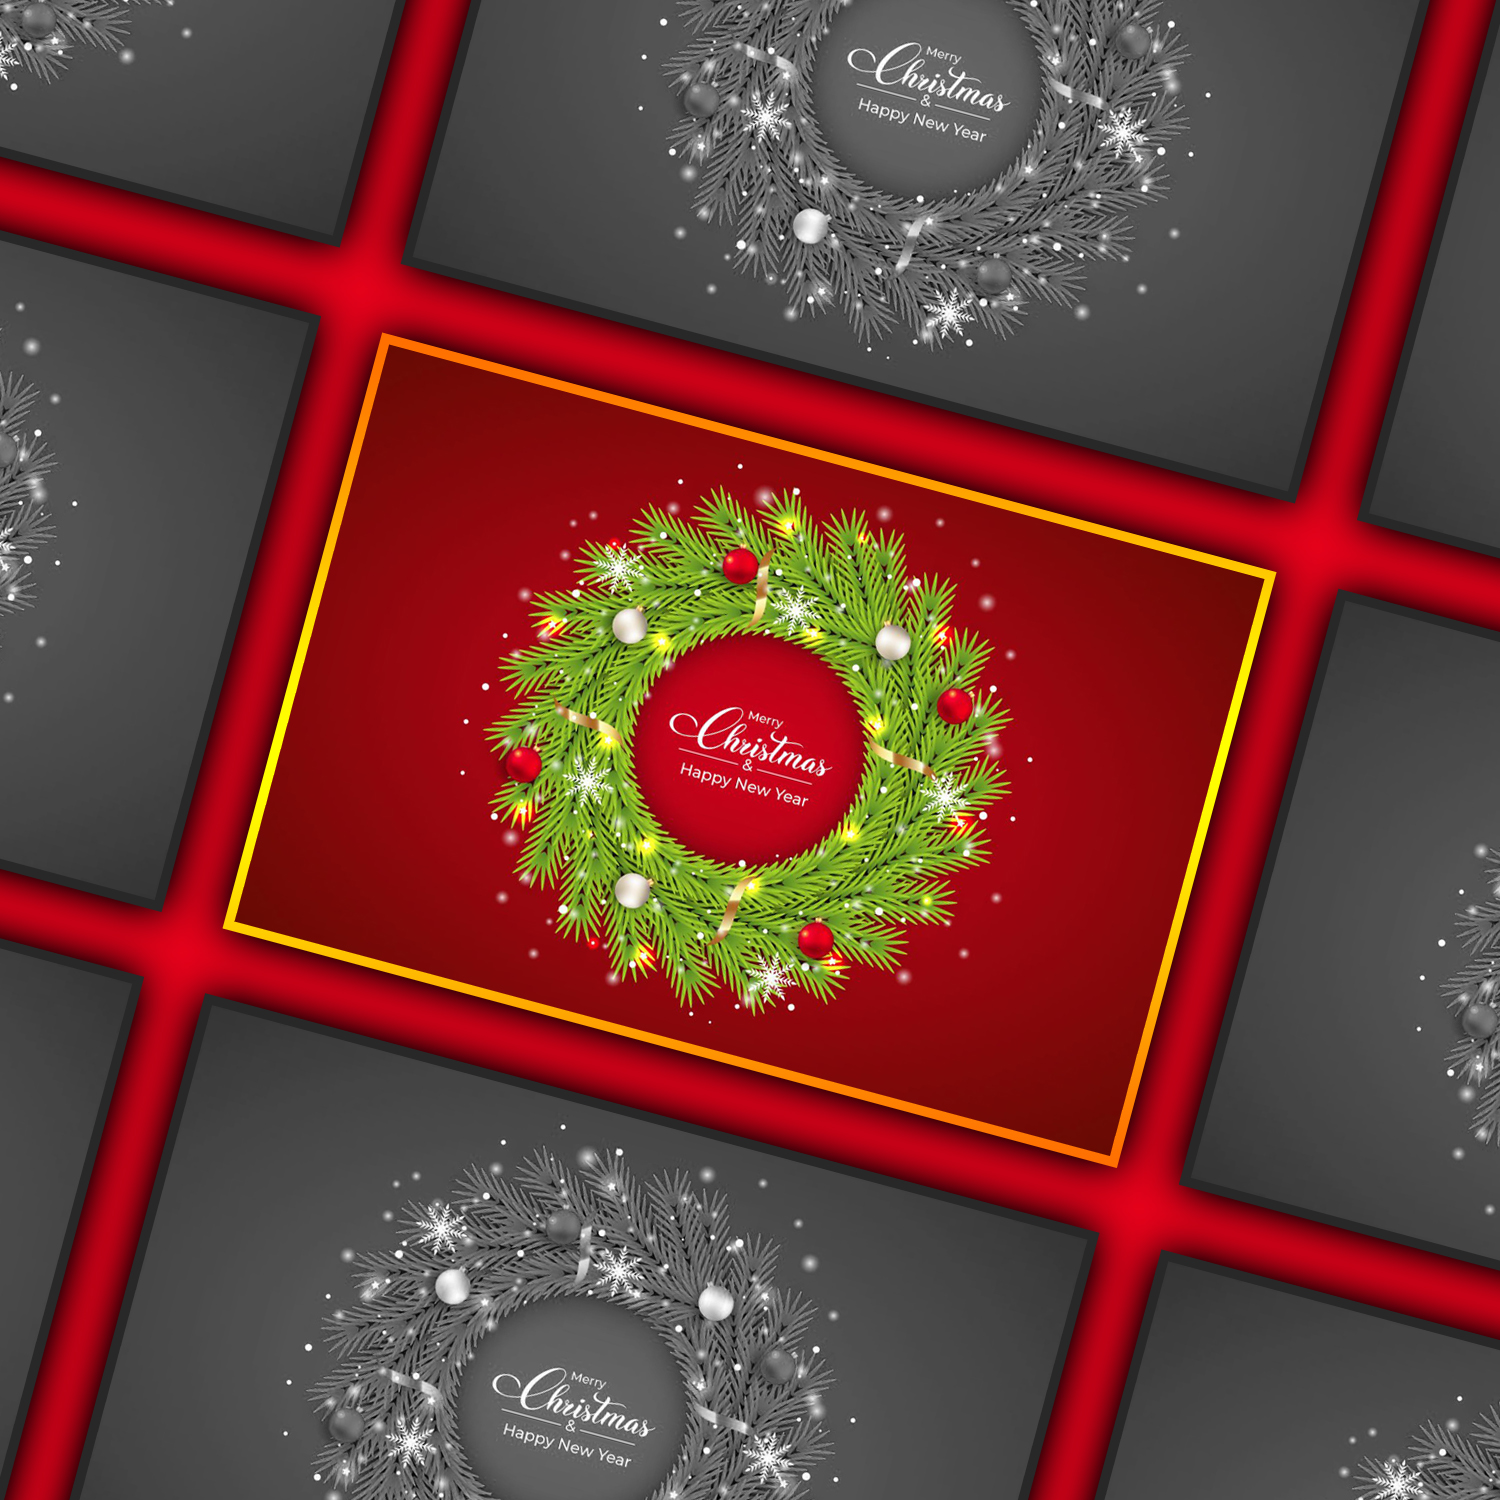 Images with christmas wreath with red background.